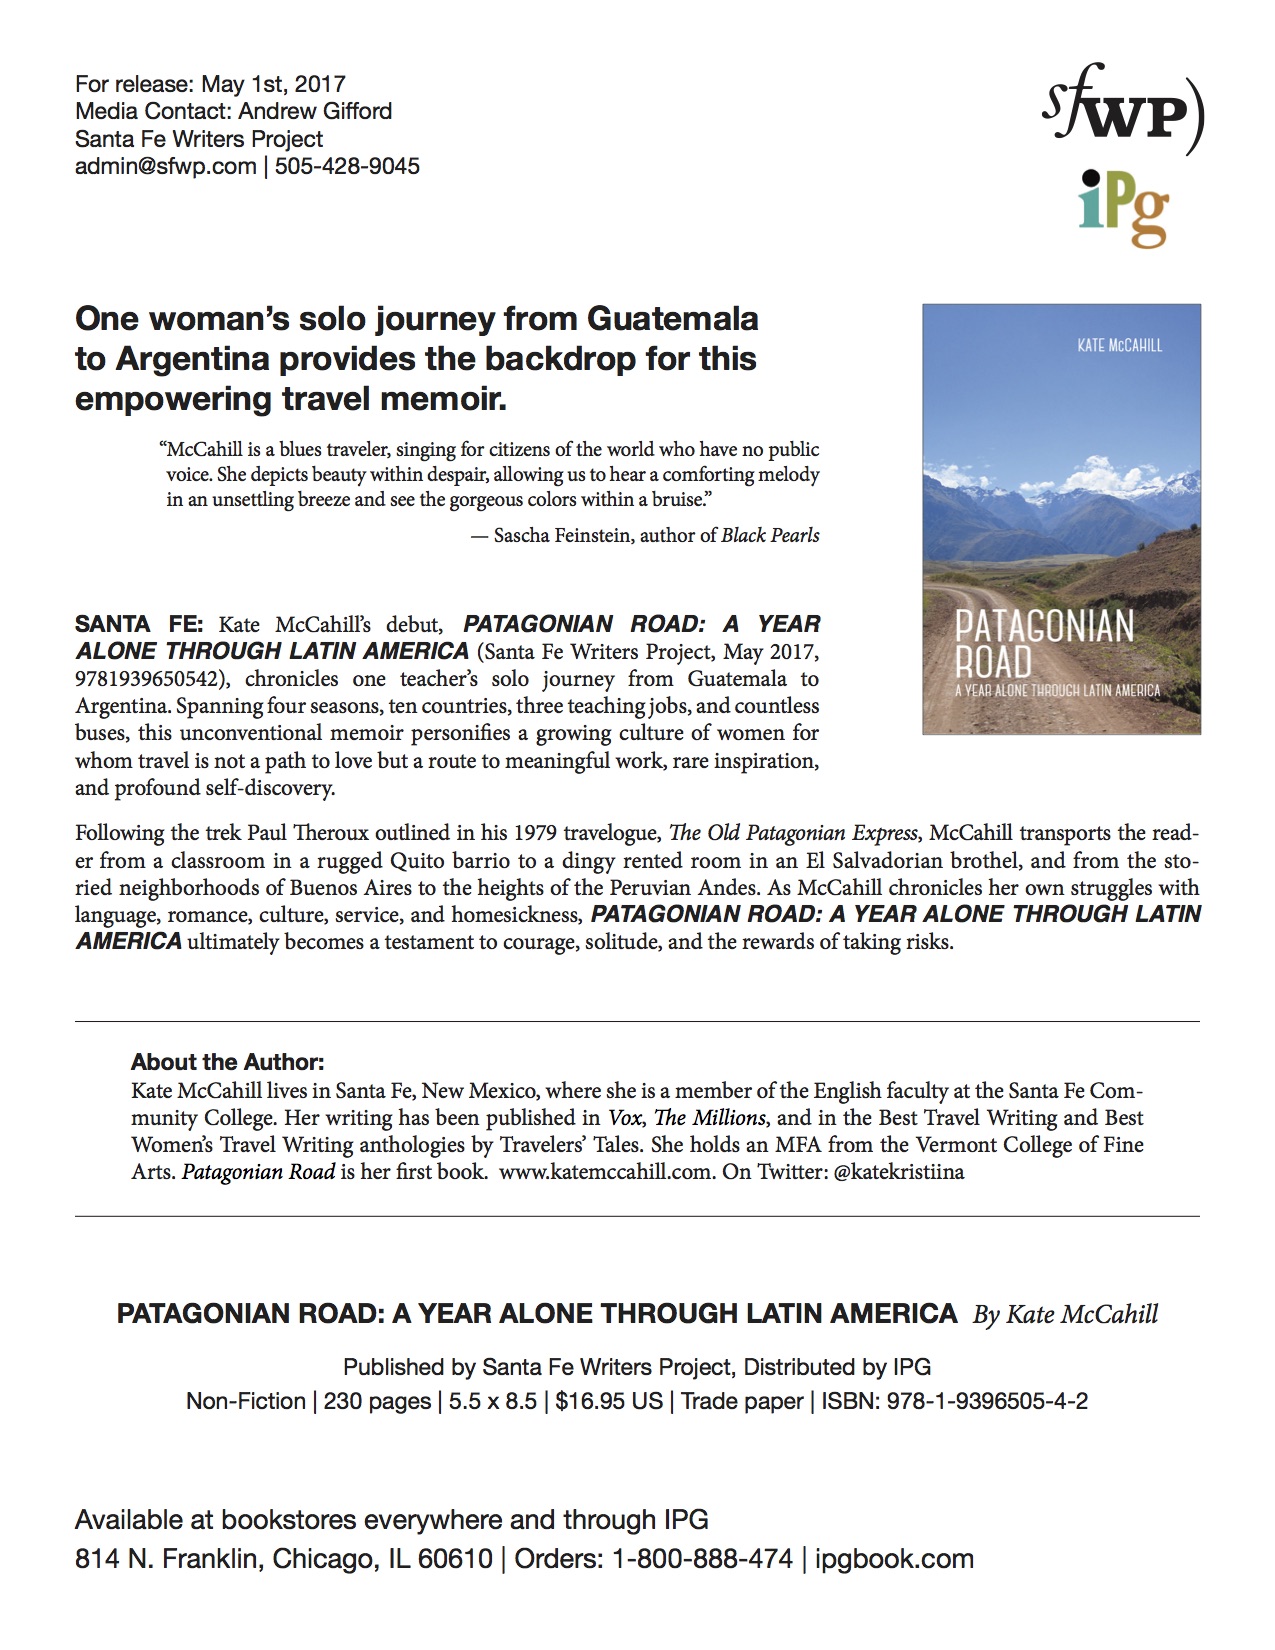 It’s Official: Announcing PATAGONIAN ROAD